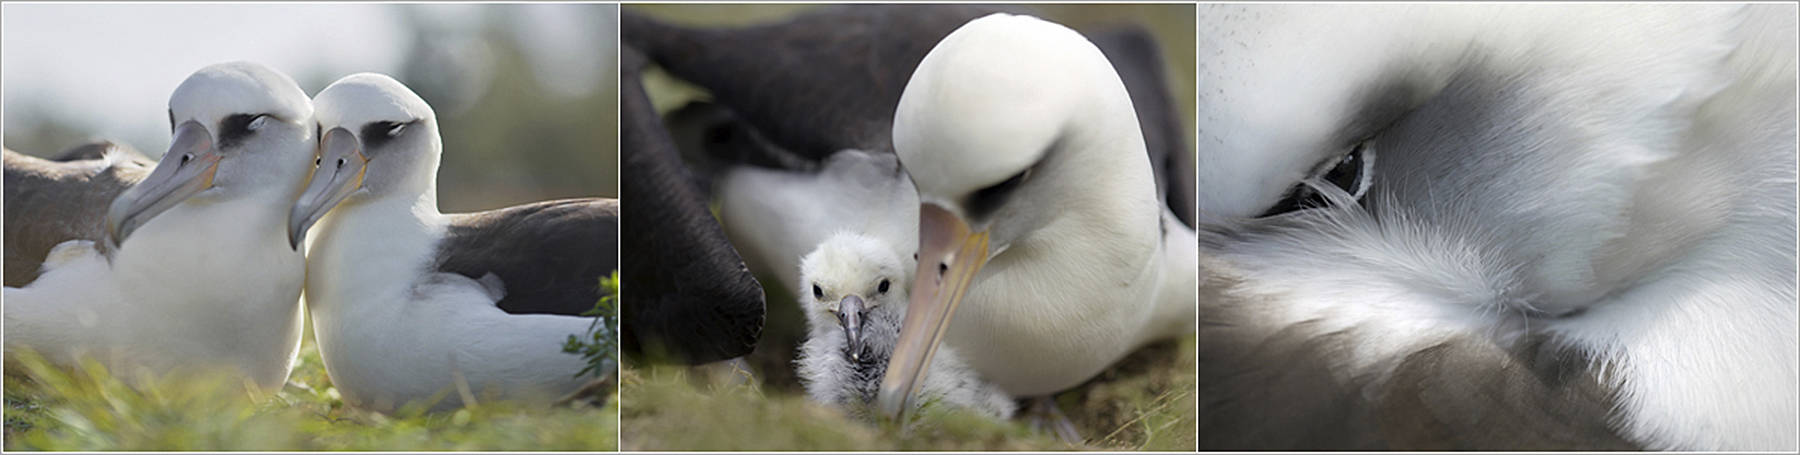 Healthy albatross can live more than 50 years, mate for life and are known to fly for years without touching land. (Photo provided by Chris Jordan)